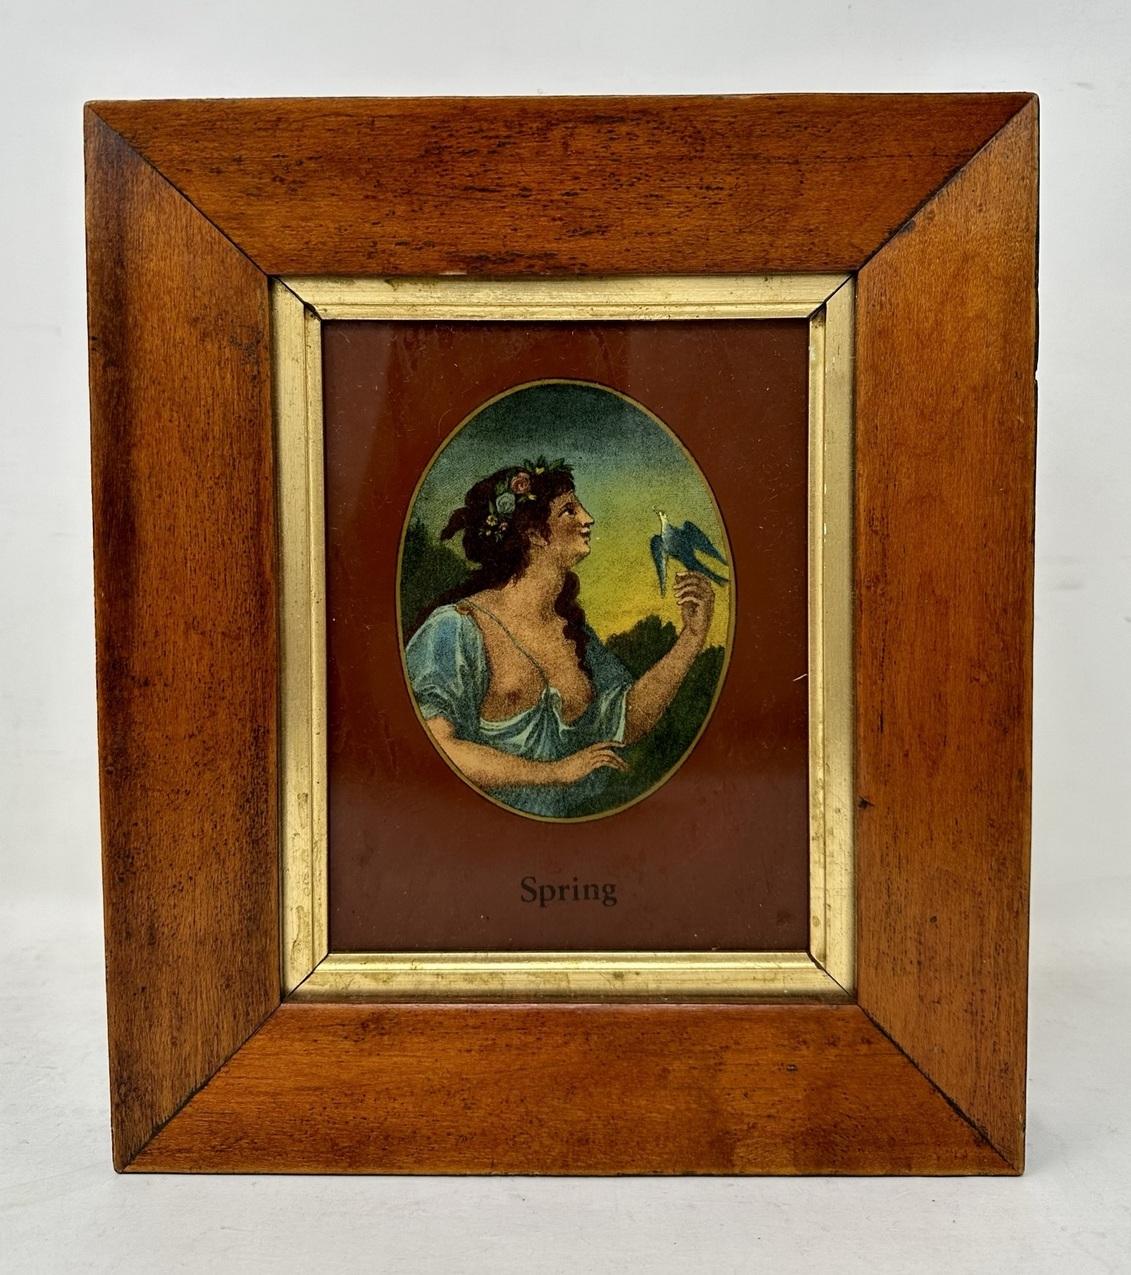 An imposing set of four Coloured oval framed Engravings of nice quality and of English origin. Third quarter of the 19th century. 

Each depicts a Victorian Lady in period dress within a gilt surround encased on a superb well figured bird’s-eye